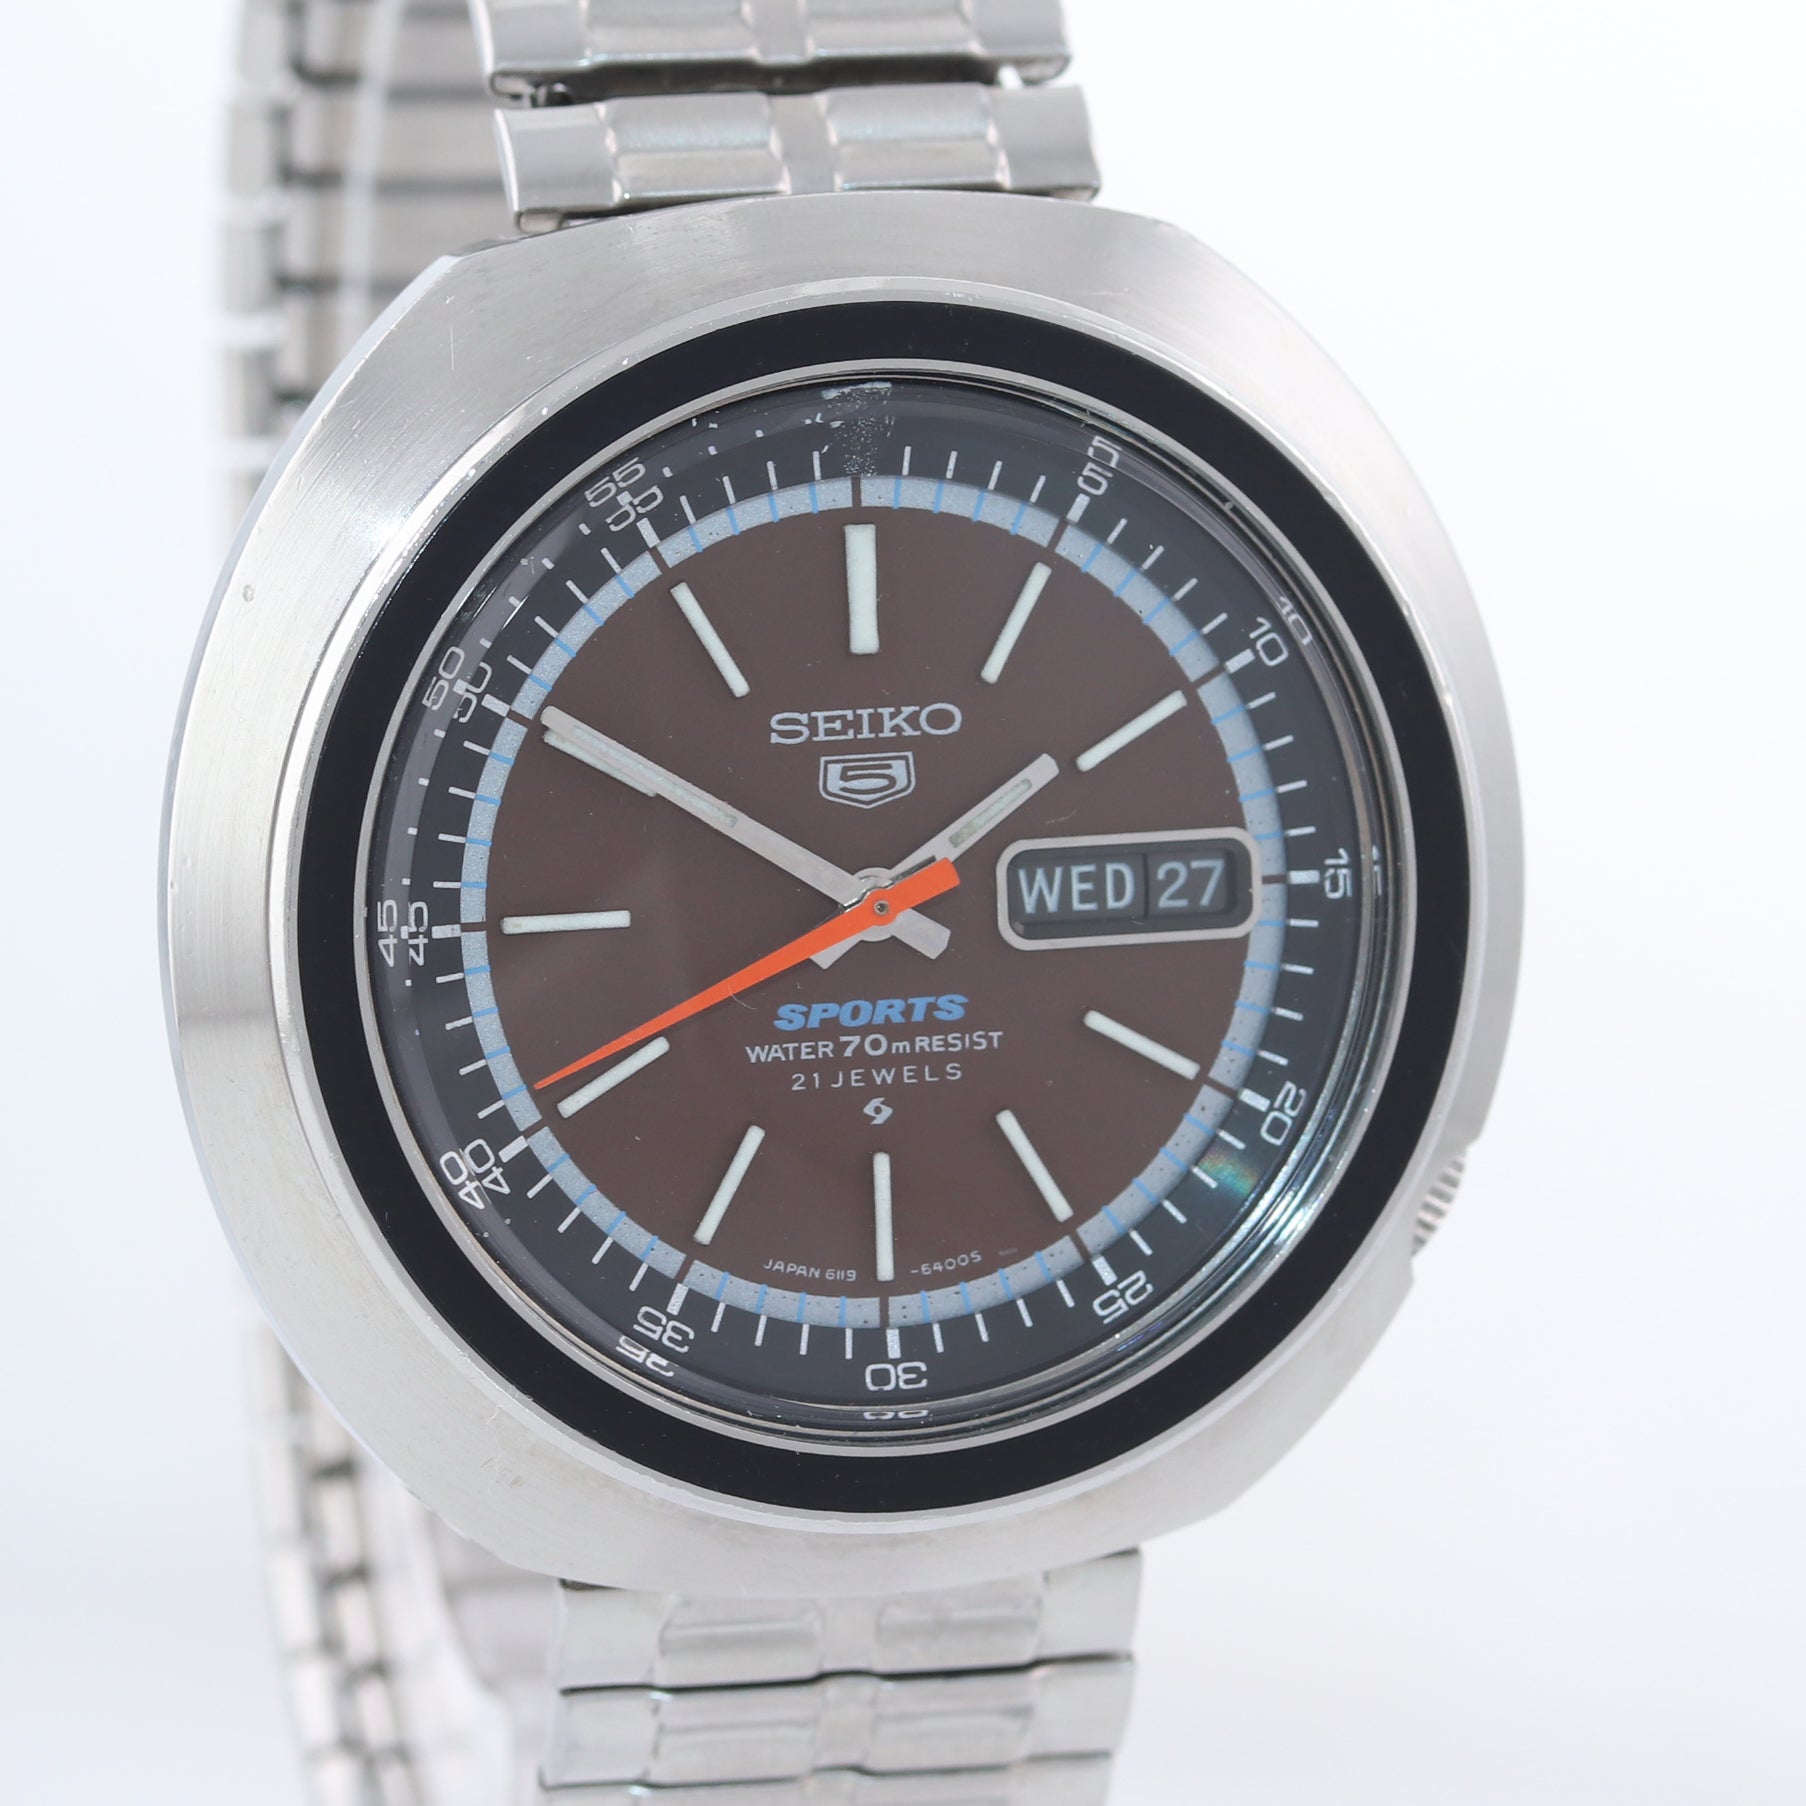 Vintage Seiko Sports 6119-6400 UFO Automatic 43mm Day Date Diver Steel